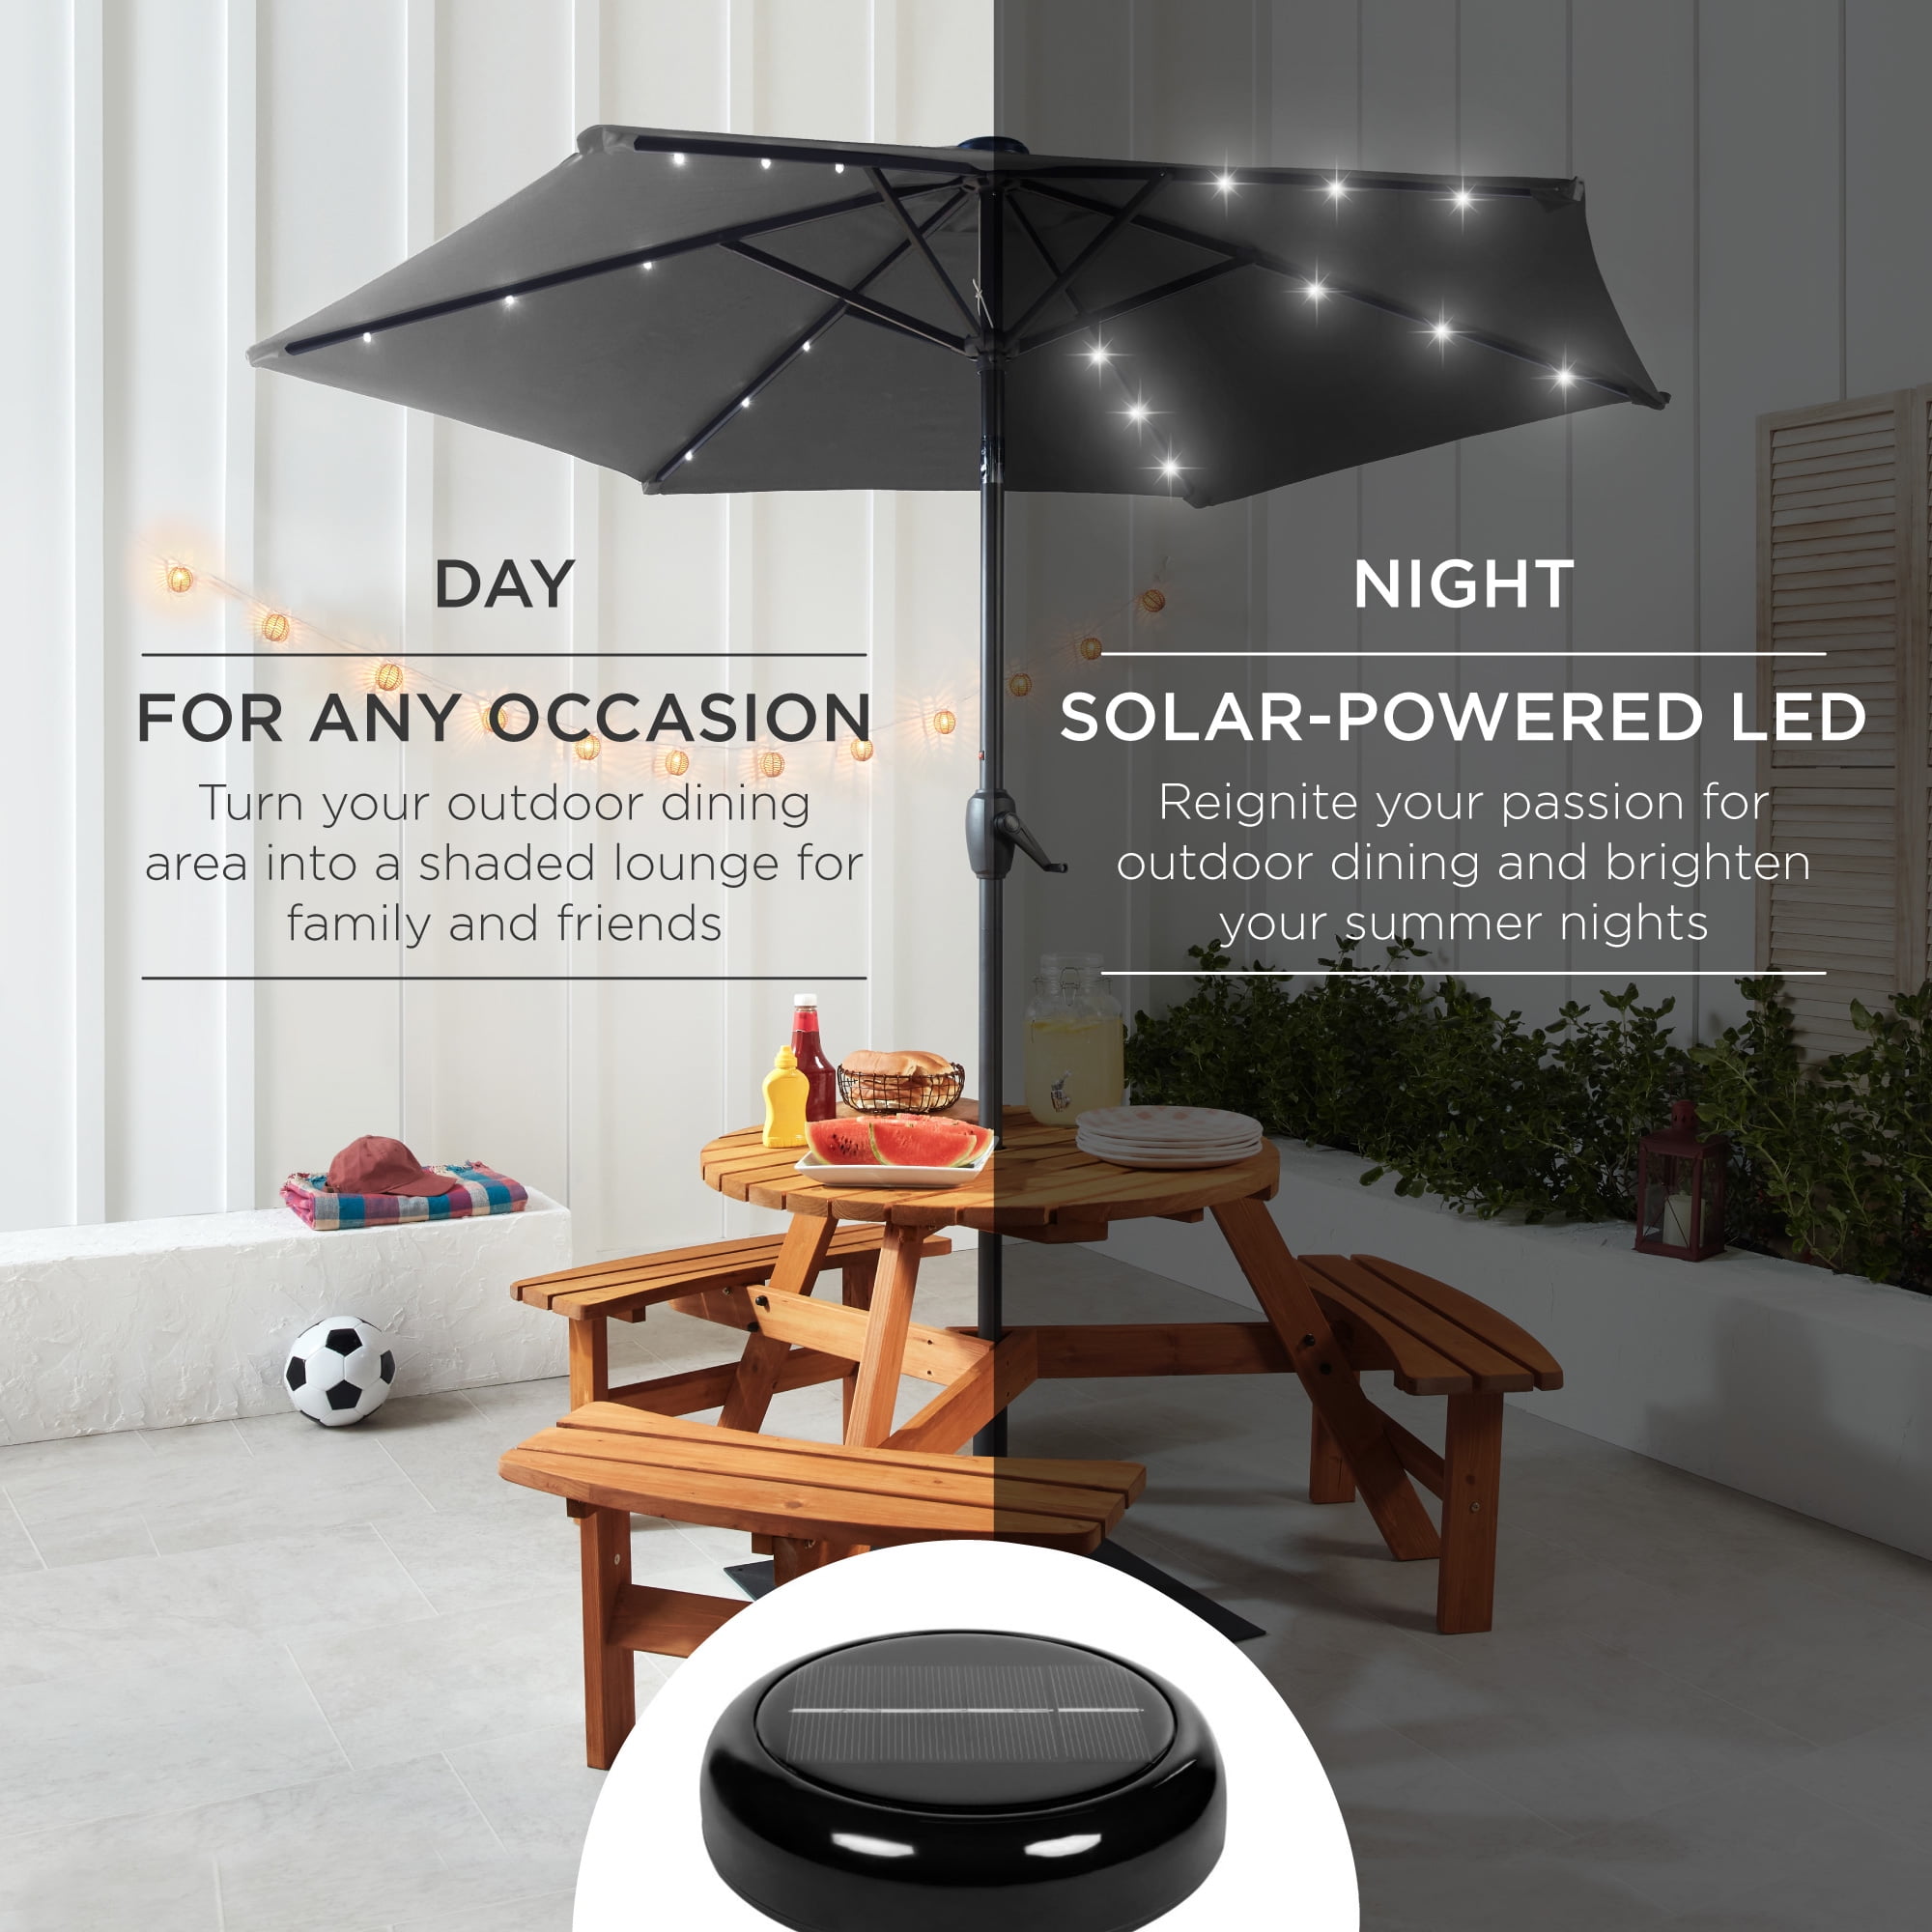 Lawn Aok Garden 7.5 ft Solar Patio Umbrella with 18 LED Lights Outdoor Table Market Umbrella with Push Button Tilt and Crank 6 Sturdy Aluminum Ribs for Deck Pool& Backyard